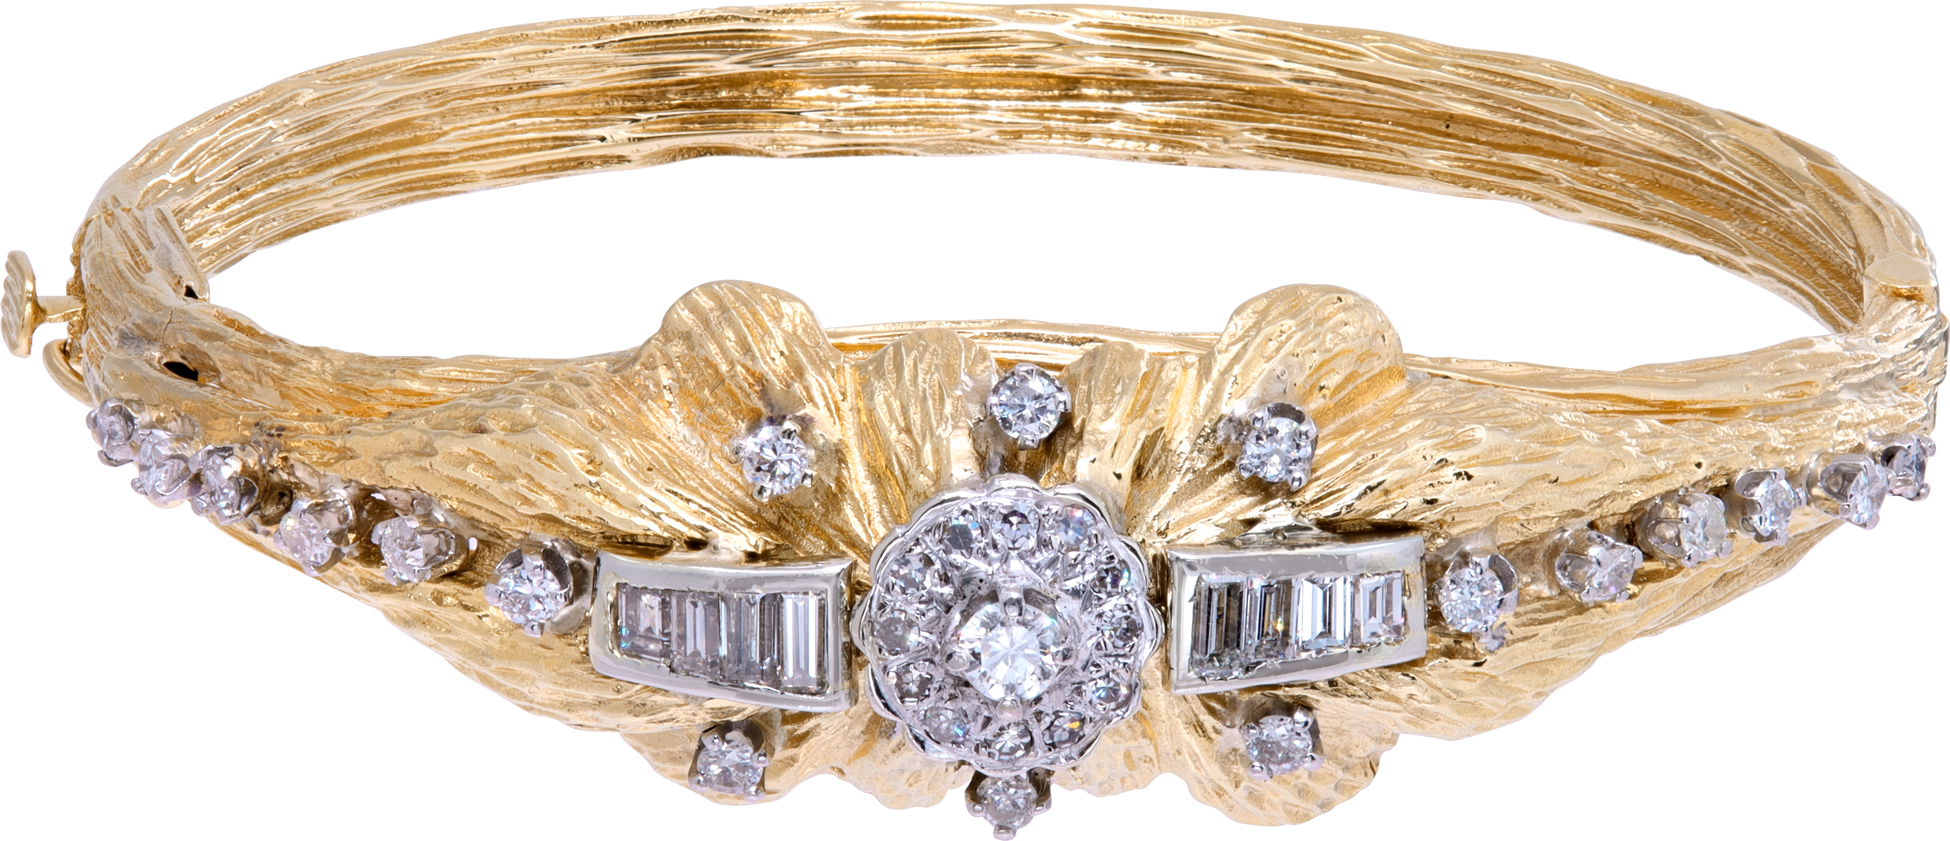 Diamond bangle with bark finish. 1.50 carats in round and baguette diamonds